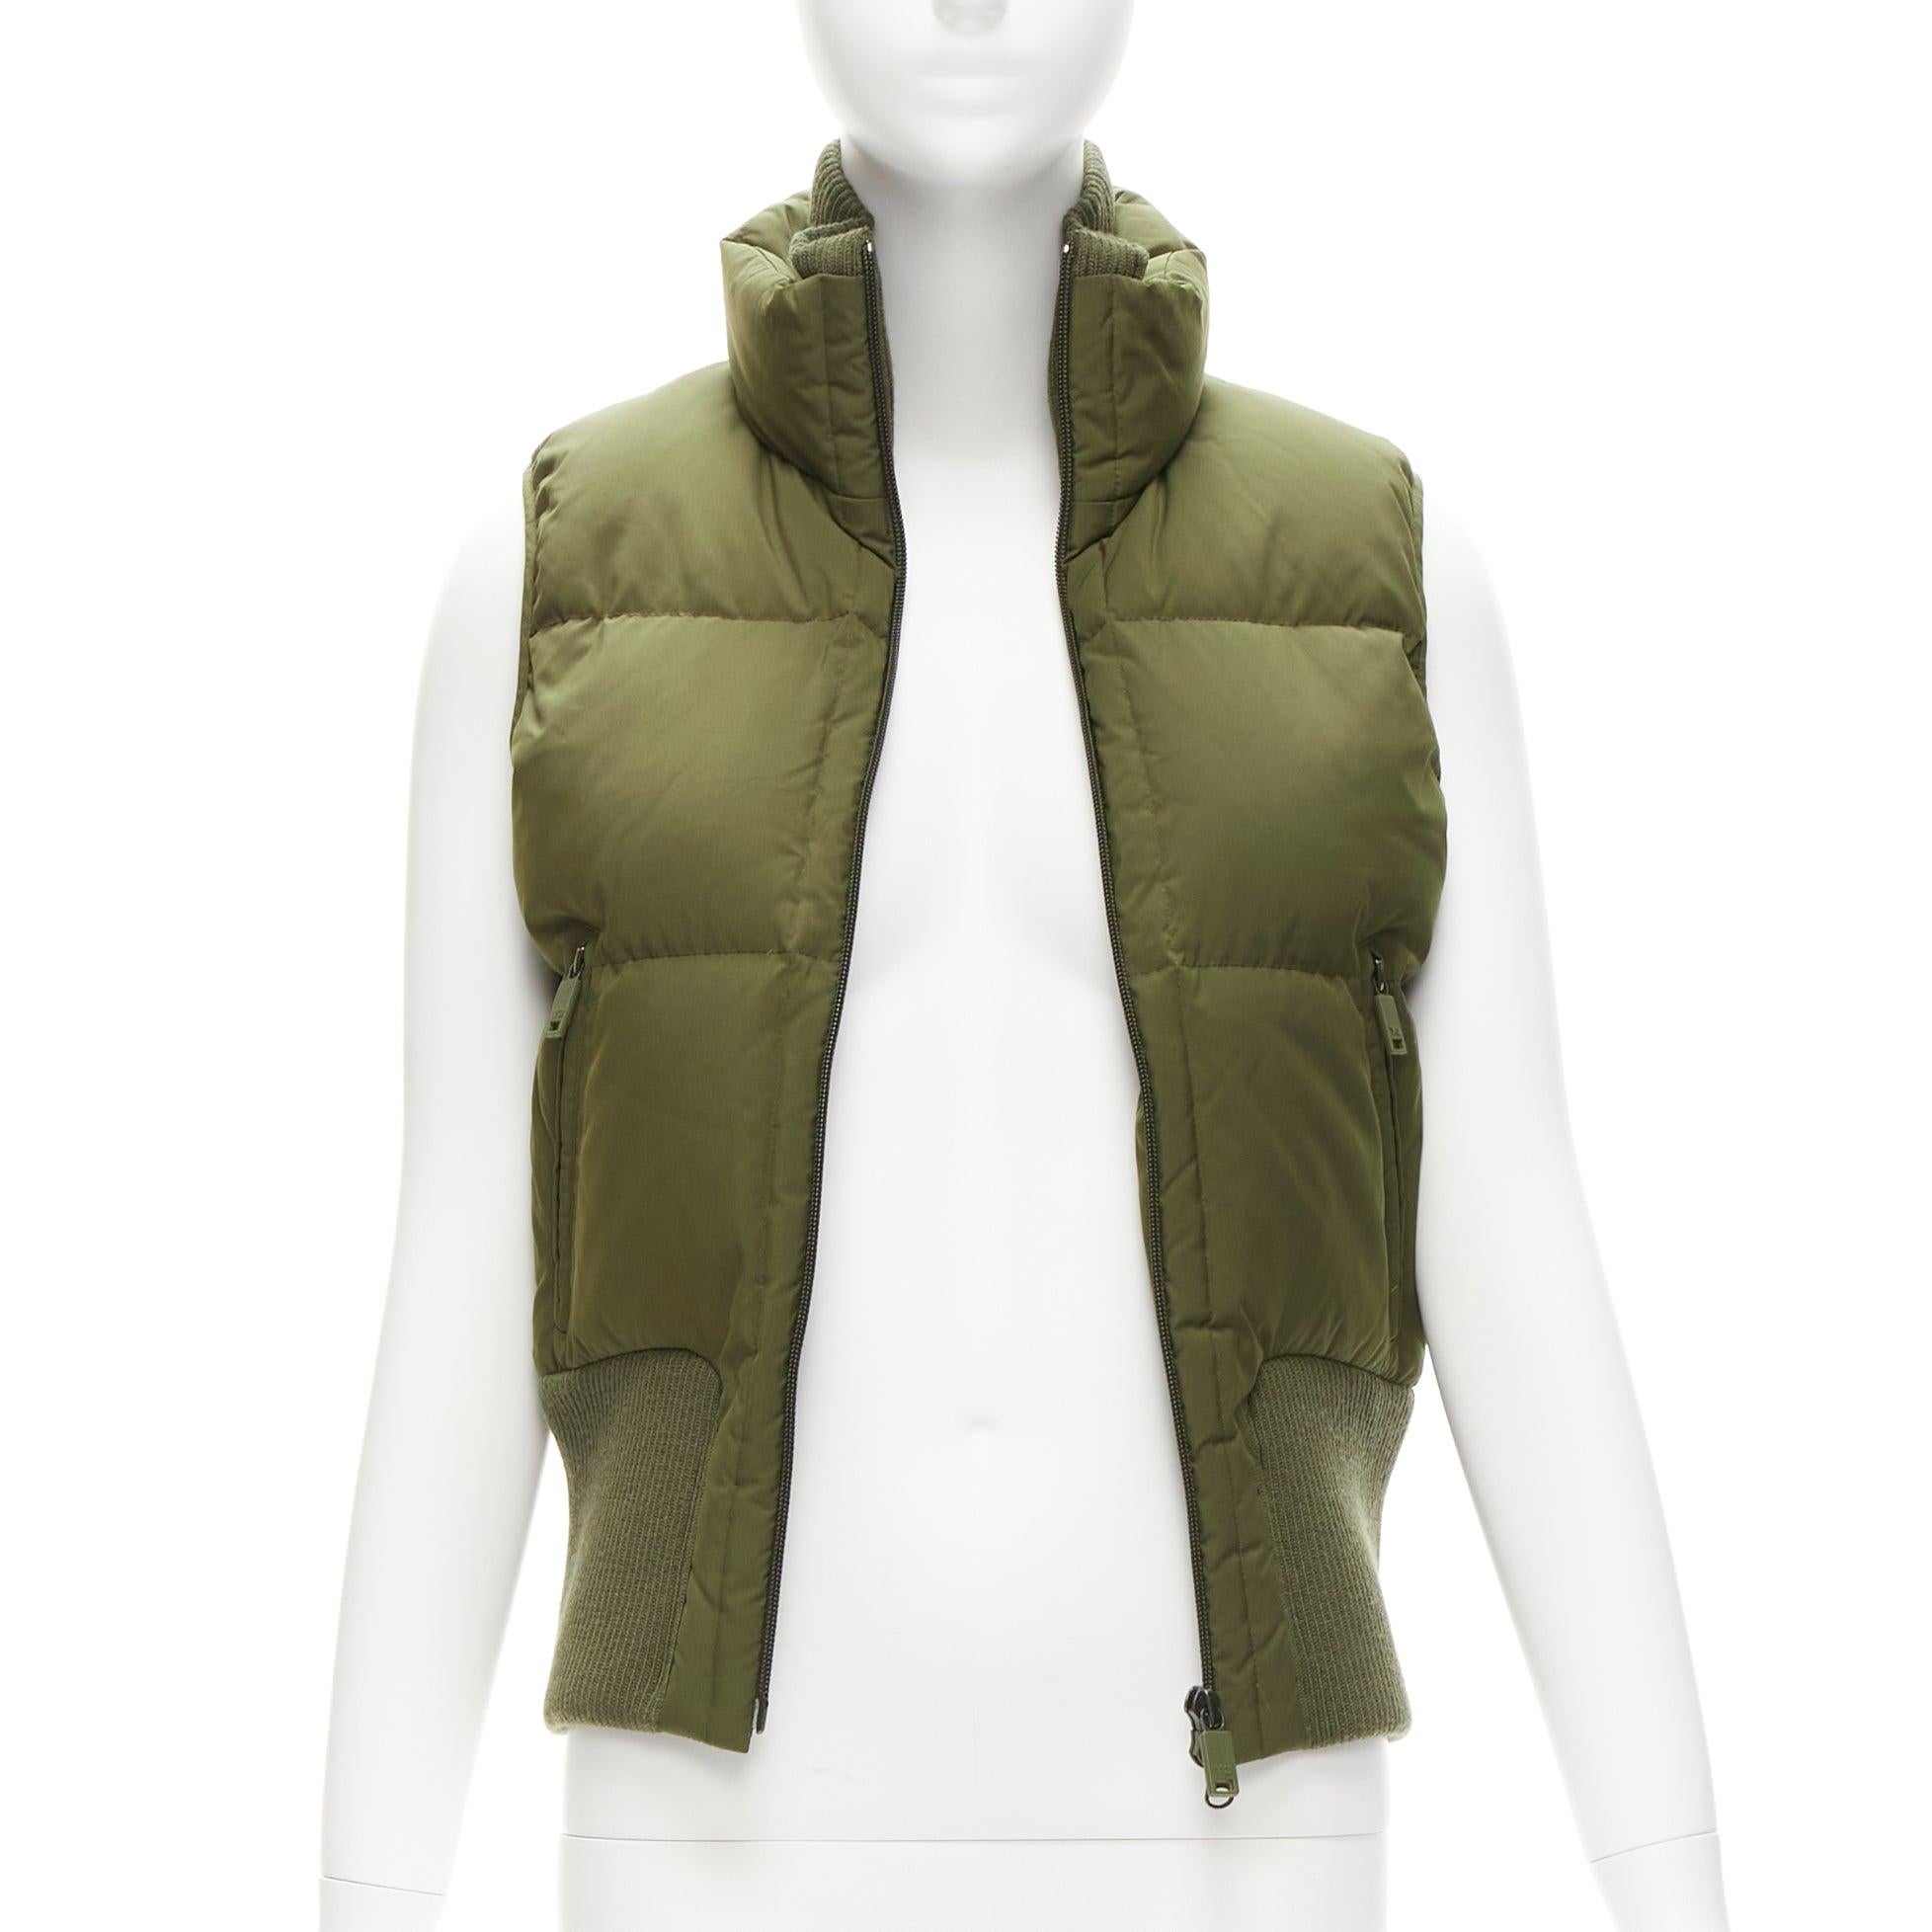 Y3 YOHJI YAMAMOTO green nylon logo high neck cropped zip puffer vest XS
Reference: ANWU/A01083
Brand: Y3
Material: Fabric
Color: Green
Pattern: Solid
Closure: Zip
Lining: Green Fabric
Extra Details: Y-3 logo printed at back
Made in: